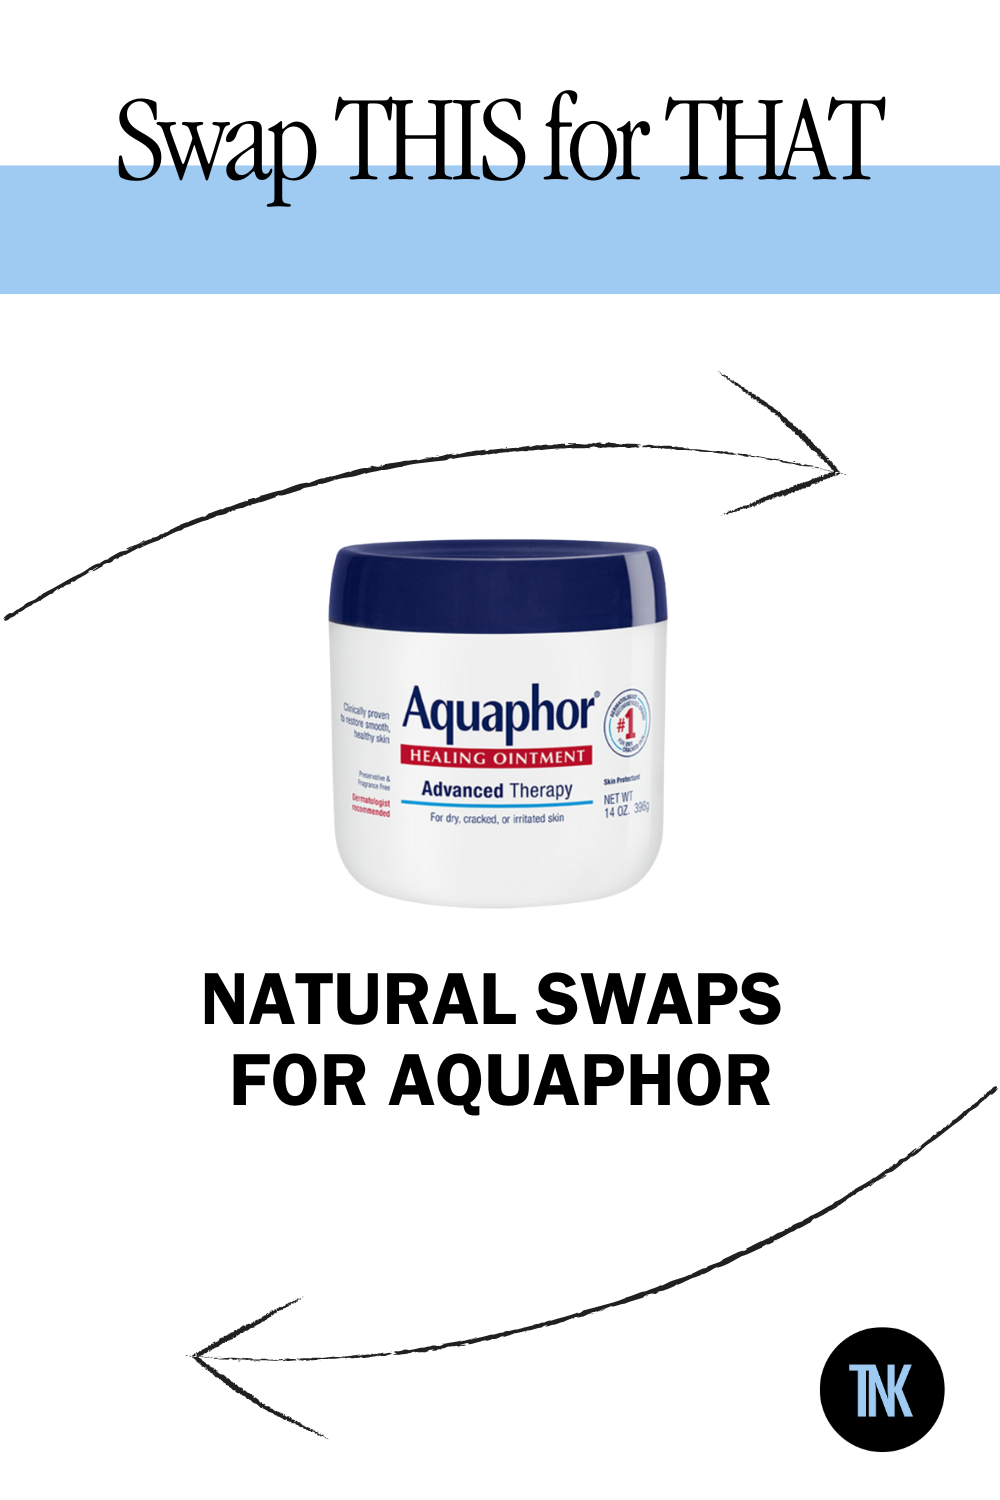 Swap this for that: try a natural aquaphor alternative with these 5 recs.